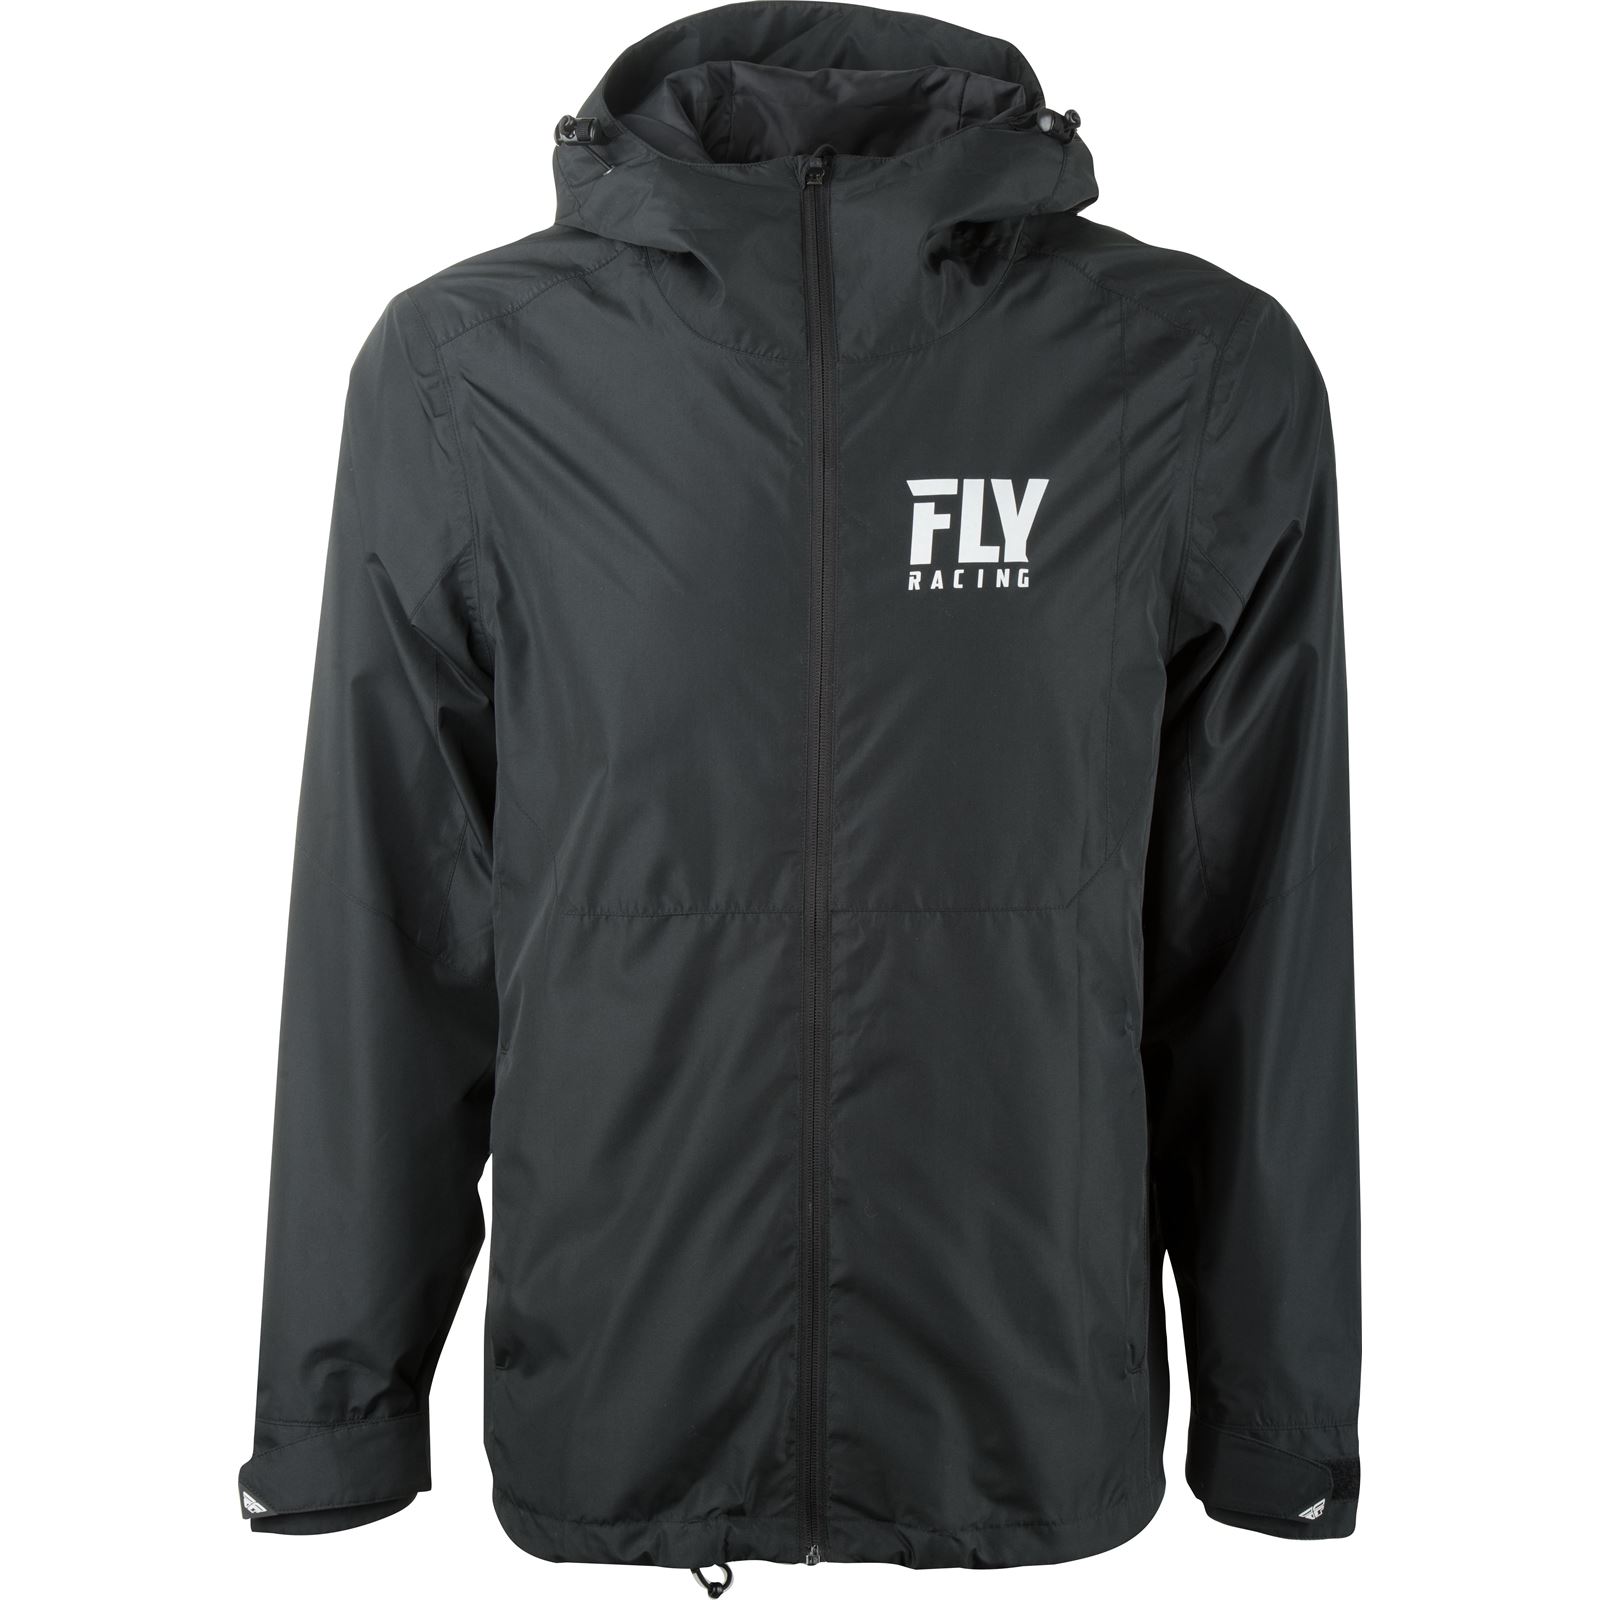 Fly Racing Pit Jacket